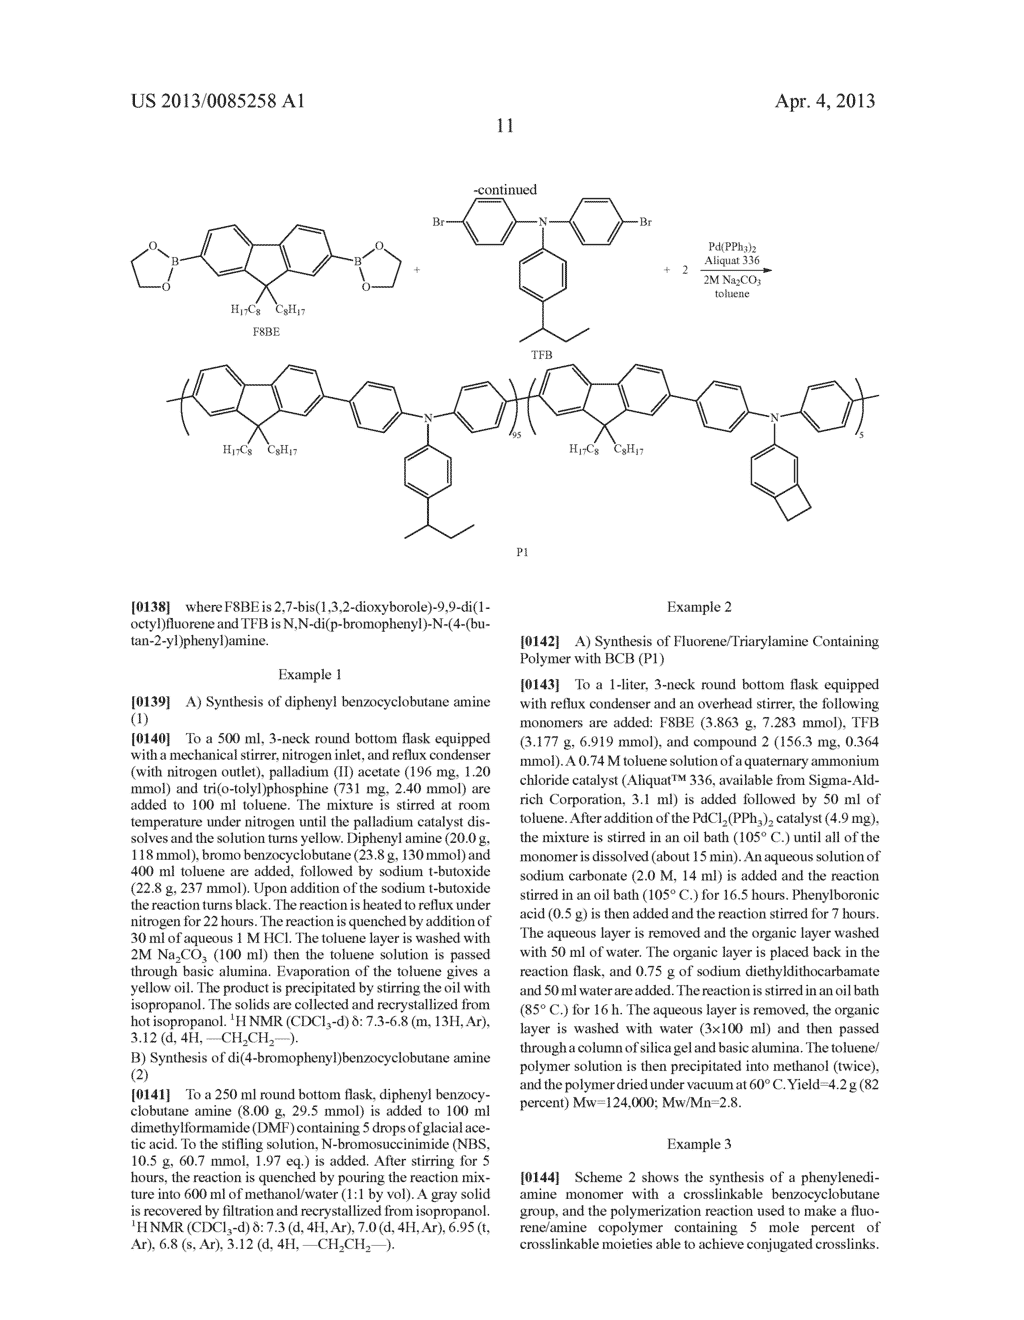 CROSSLINKABLE ARYLAMINE COMPOUNDS AND CONJUGATED OLIGOMERS OR POLYMERS     BASED THEREON - diagram, schematic, and image 15